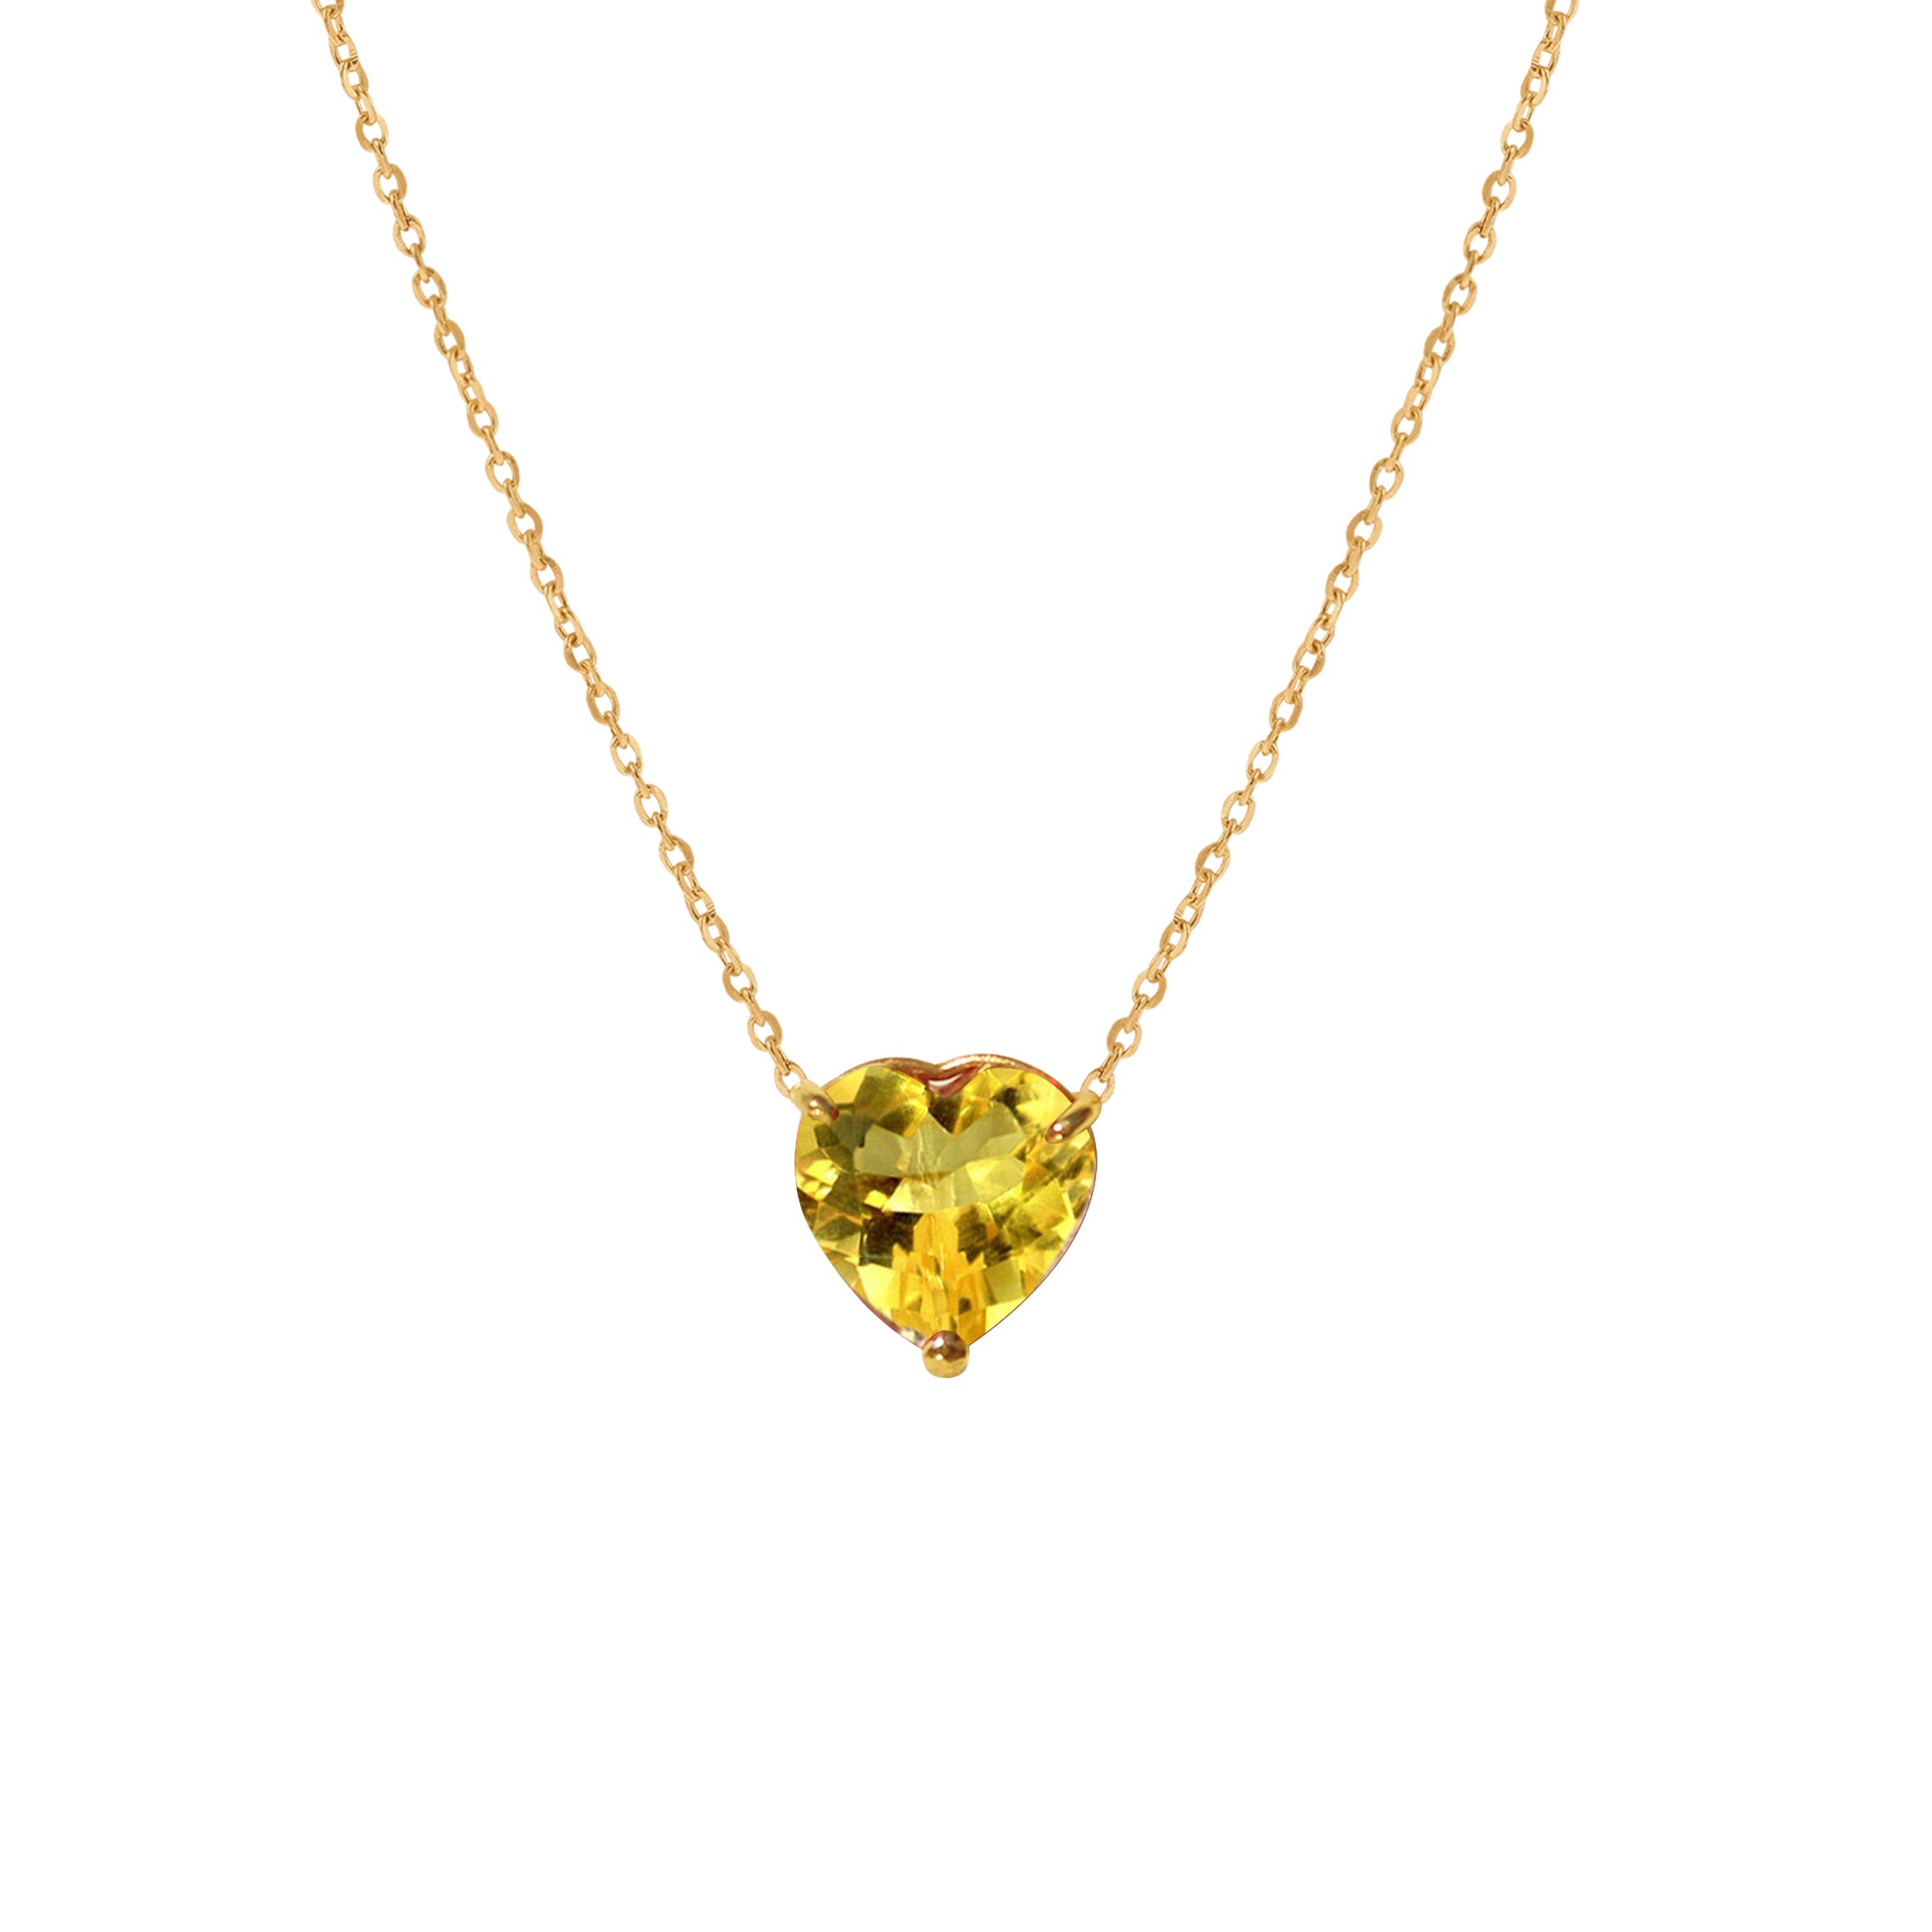 NECKLACE 18KT GOLD N1YK97 – Jewelivery - INT